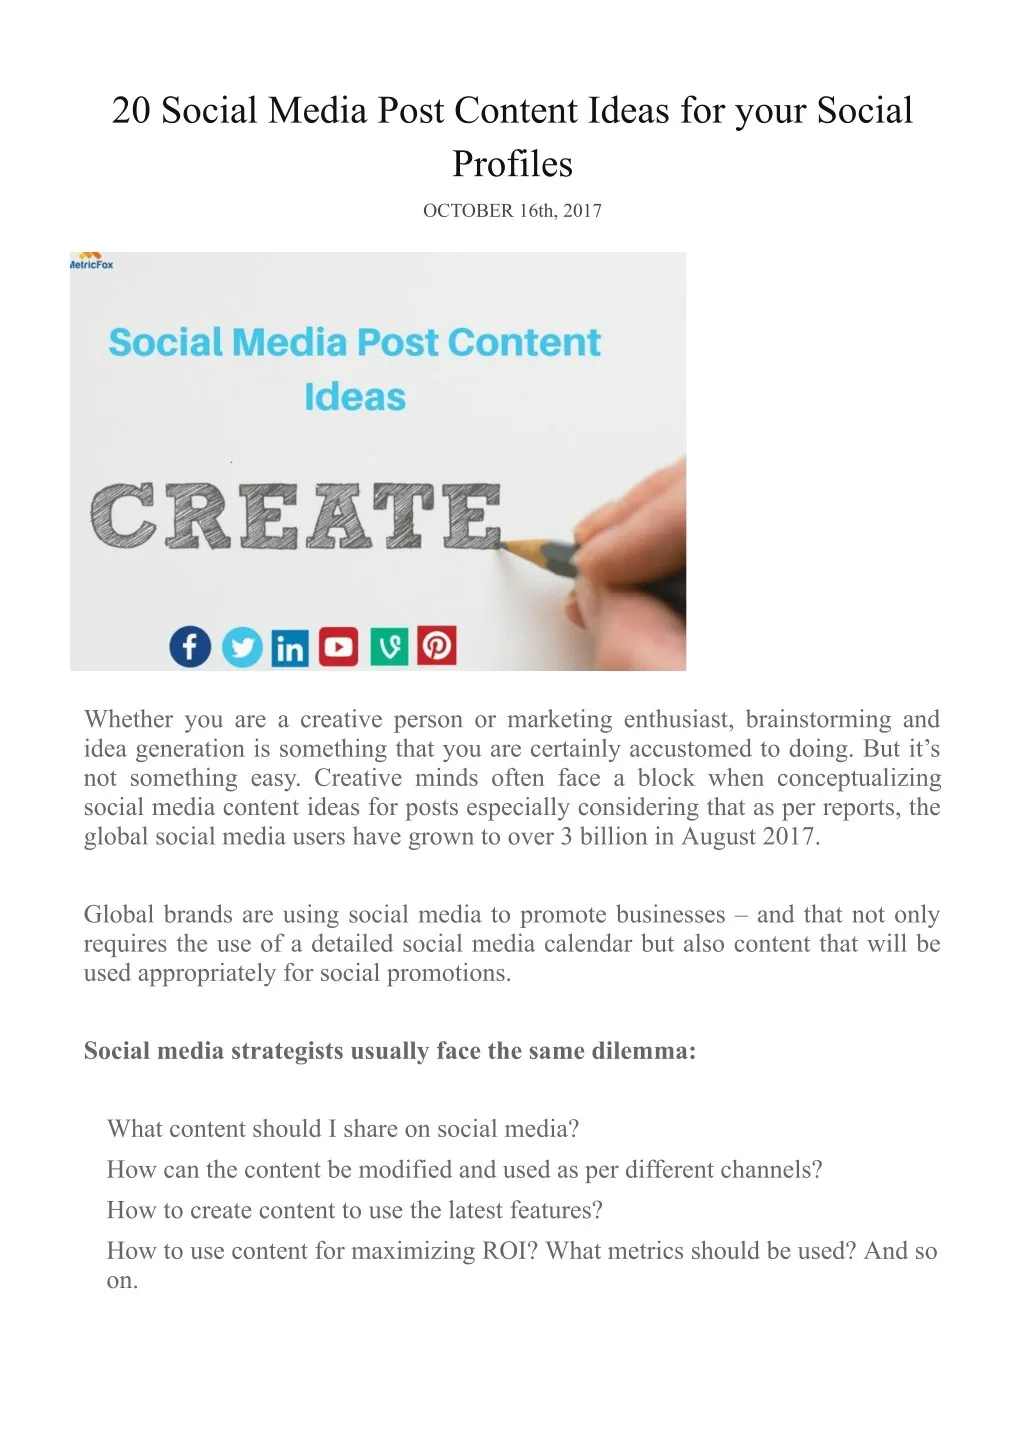 20 social media post content ideas for your